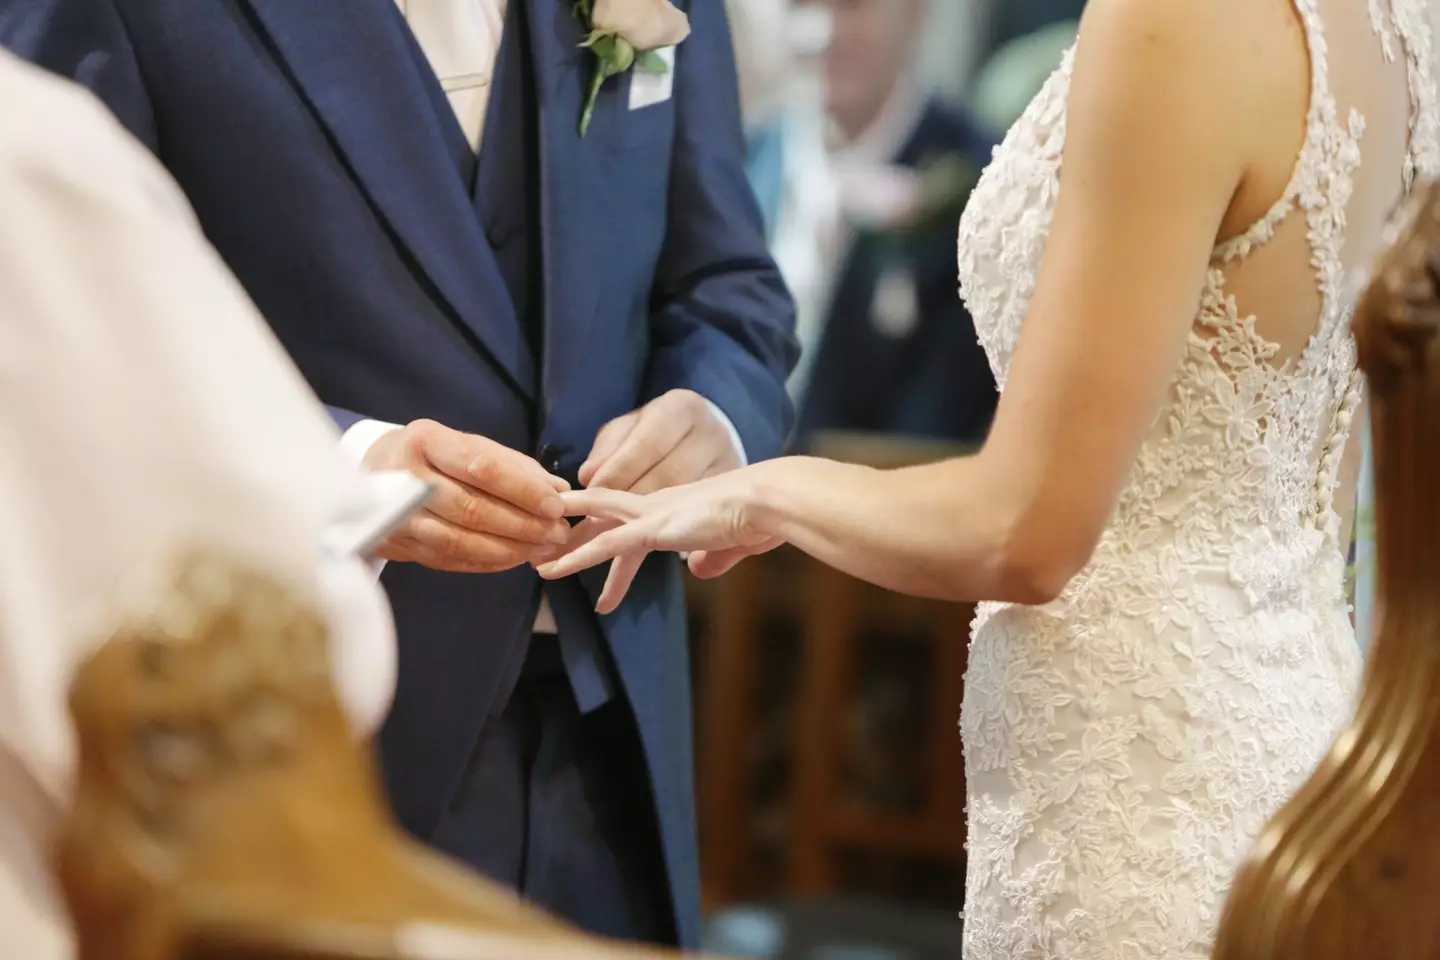 Are men fibbing about wanting to tie the knot?